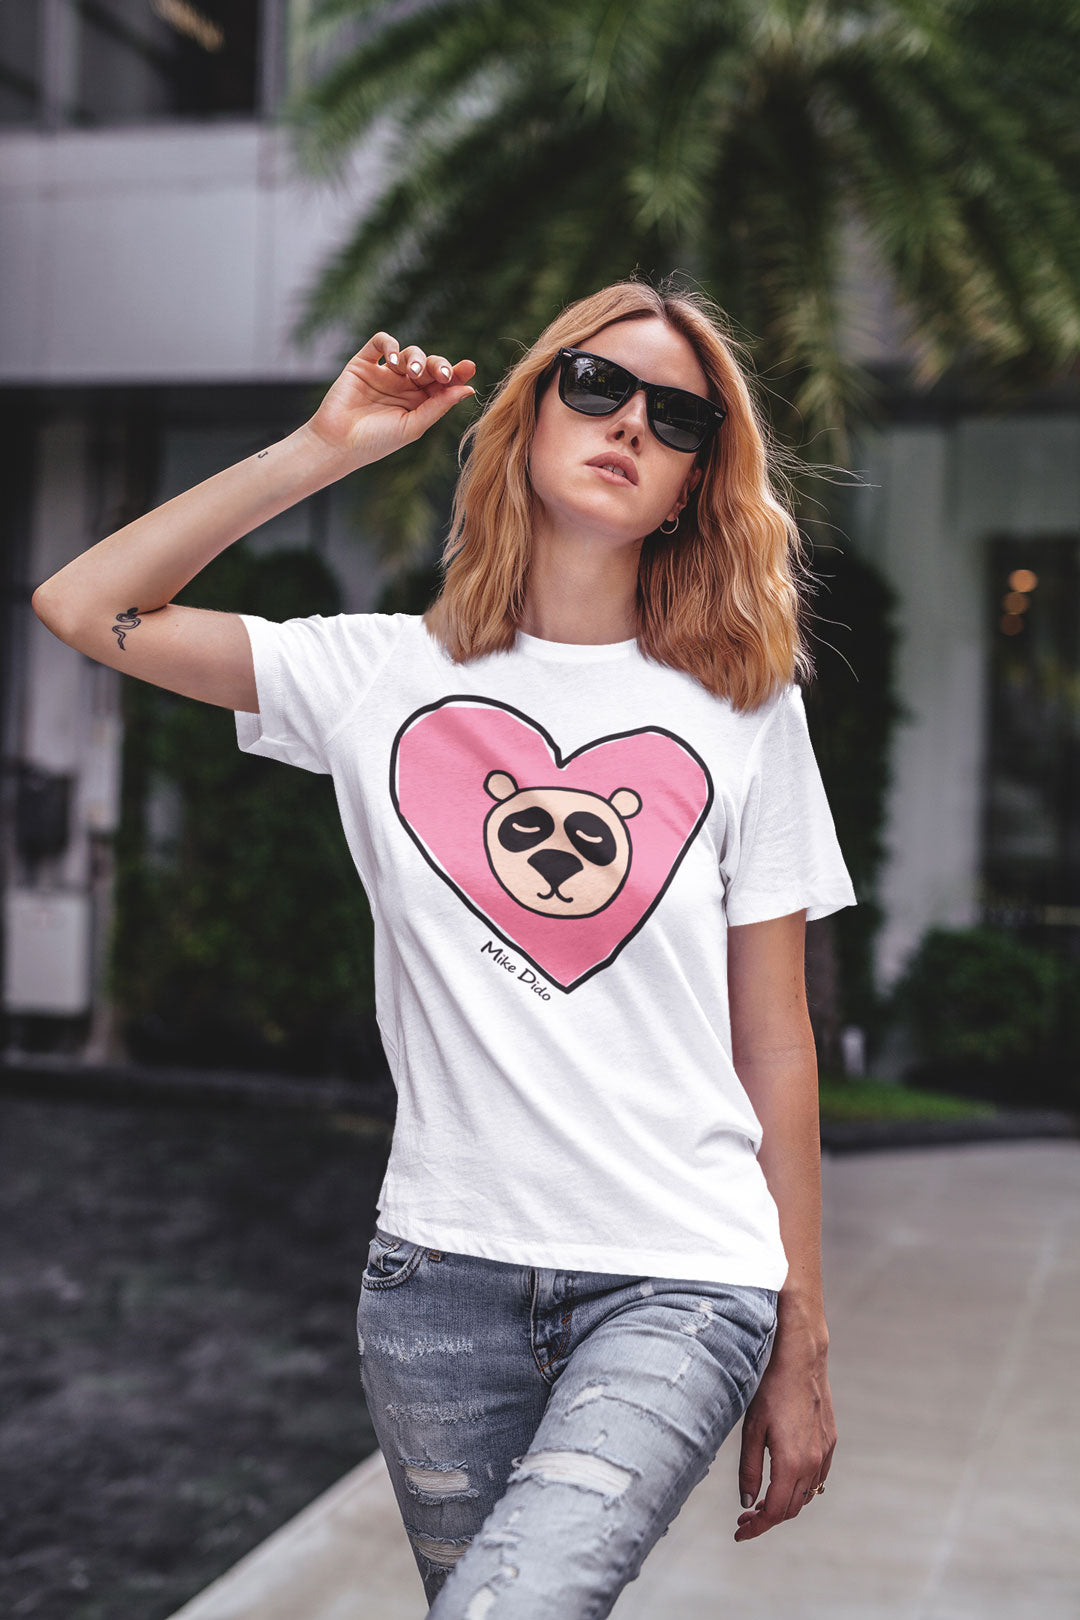 Funny T-Shirt With Panda And Heart By Mike Dido